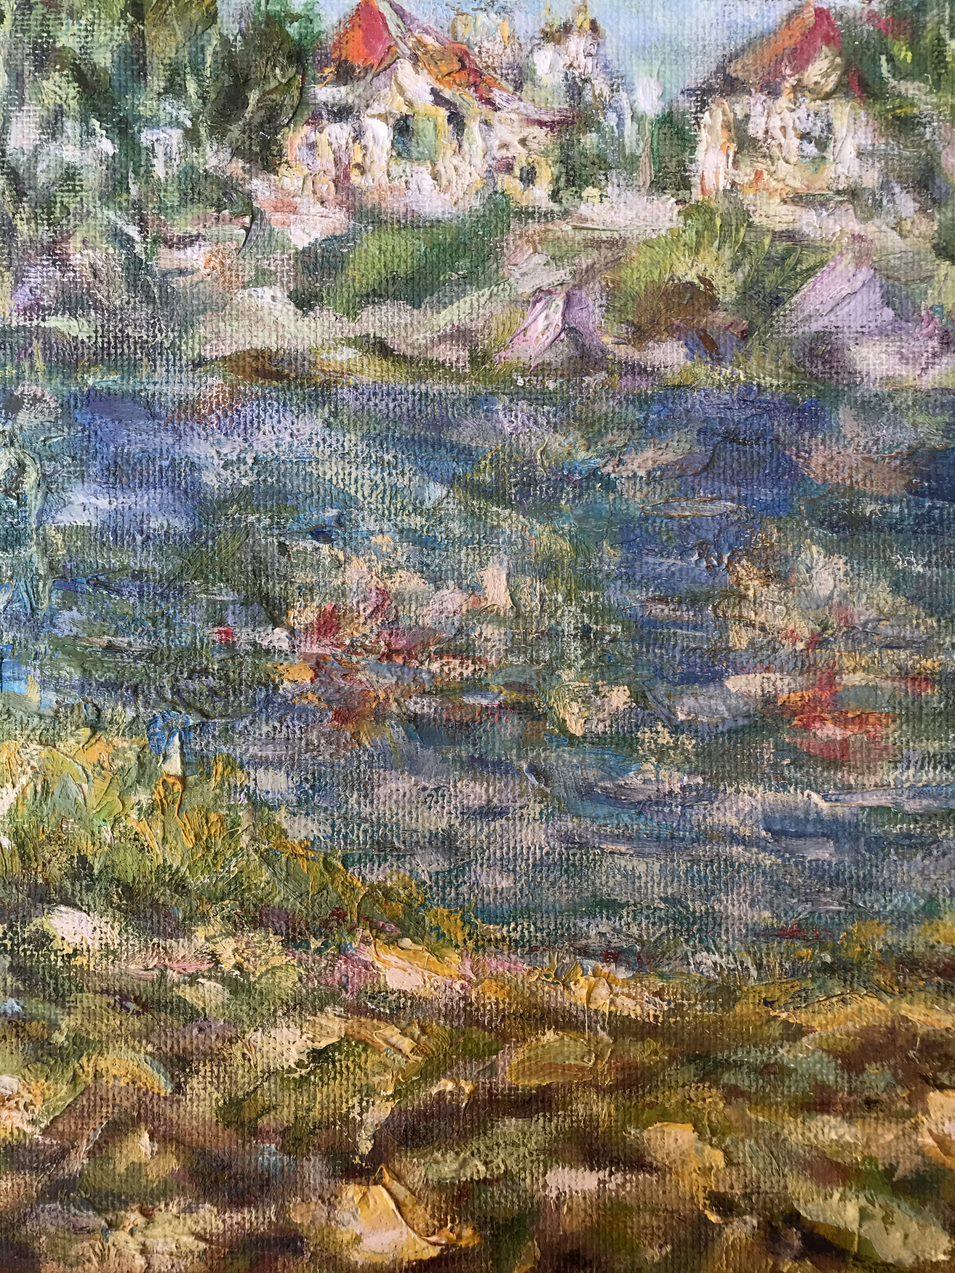 Artist: Shapoval Ivan Leontyevich
Work: Original oil painting, handmade artwork, one of a kind 
Medium: Oil on Cardboard
Style: Impressionism
Year: 2011
Title: Near the River Psel
Size: 15.5